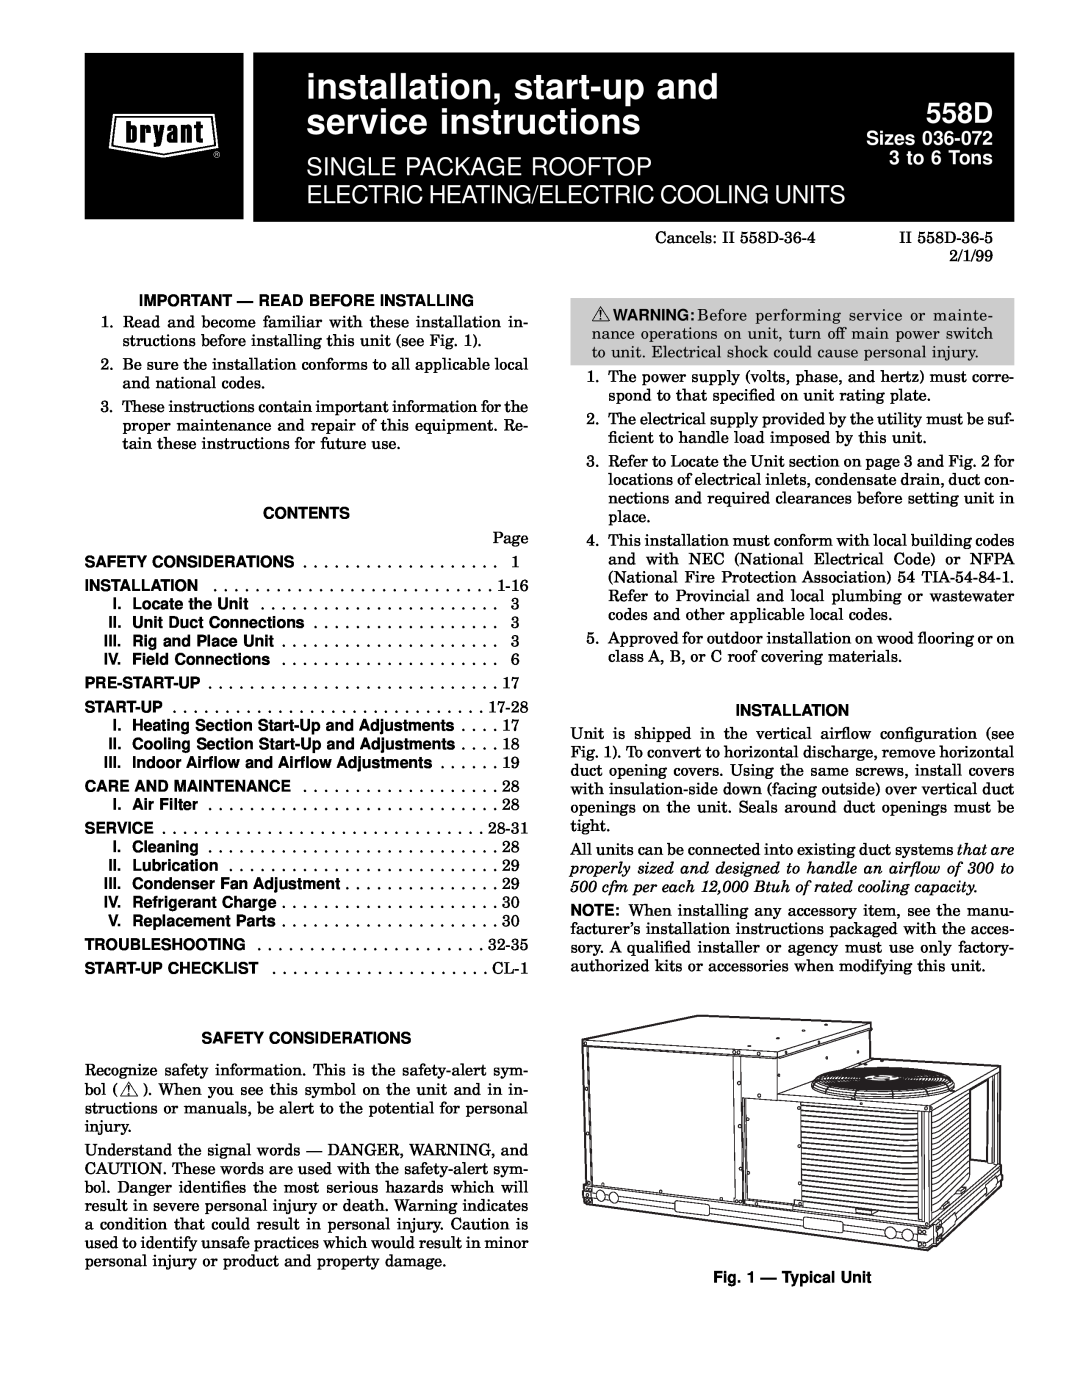 Bryant 558D installation instructions Important Ð Read Before Installing, Contents, Safety Considerations, Installation 